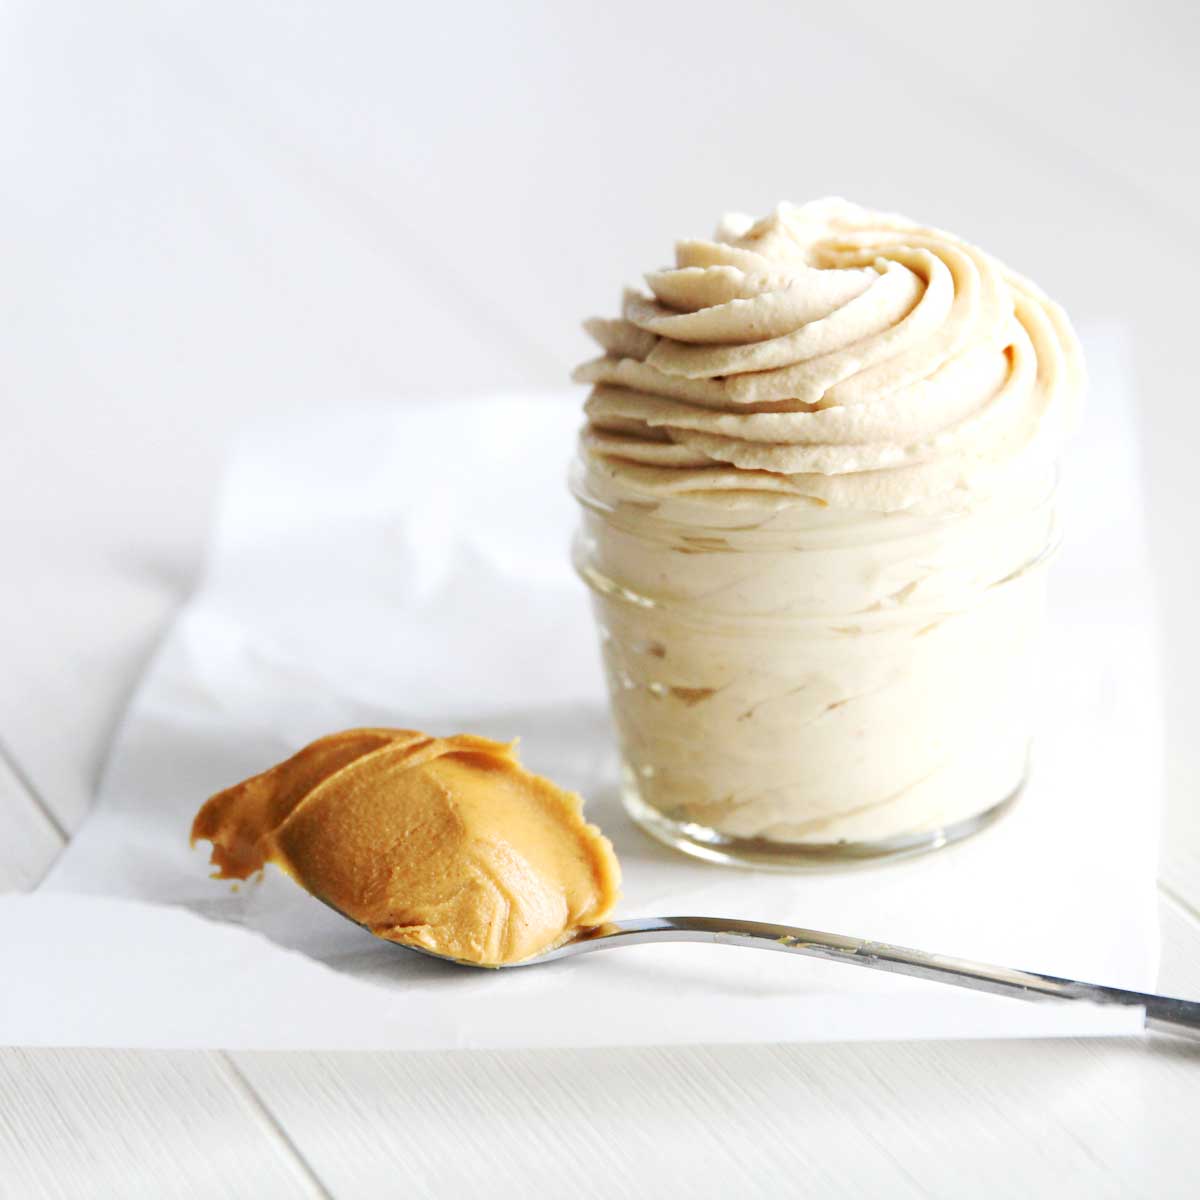 Peanut Butter Whipped Cream Recipe That Tastes Like Reeses Desserts - Peppermint Whipped Cream